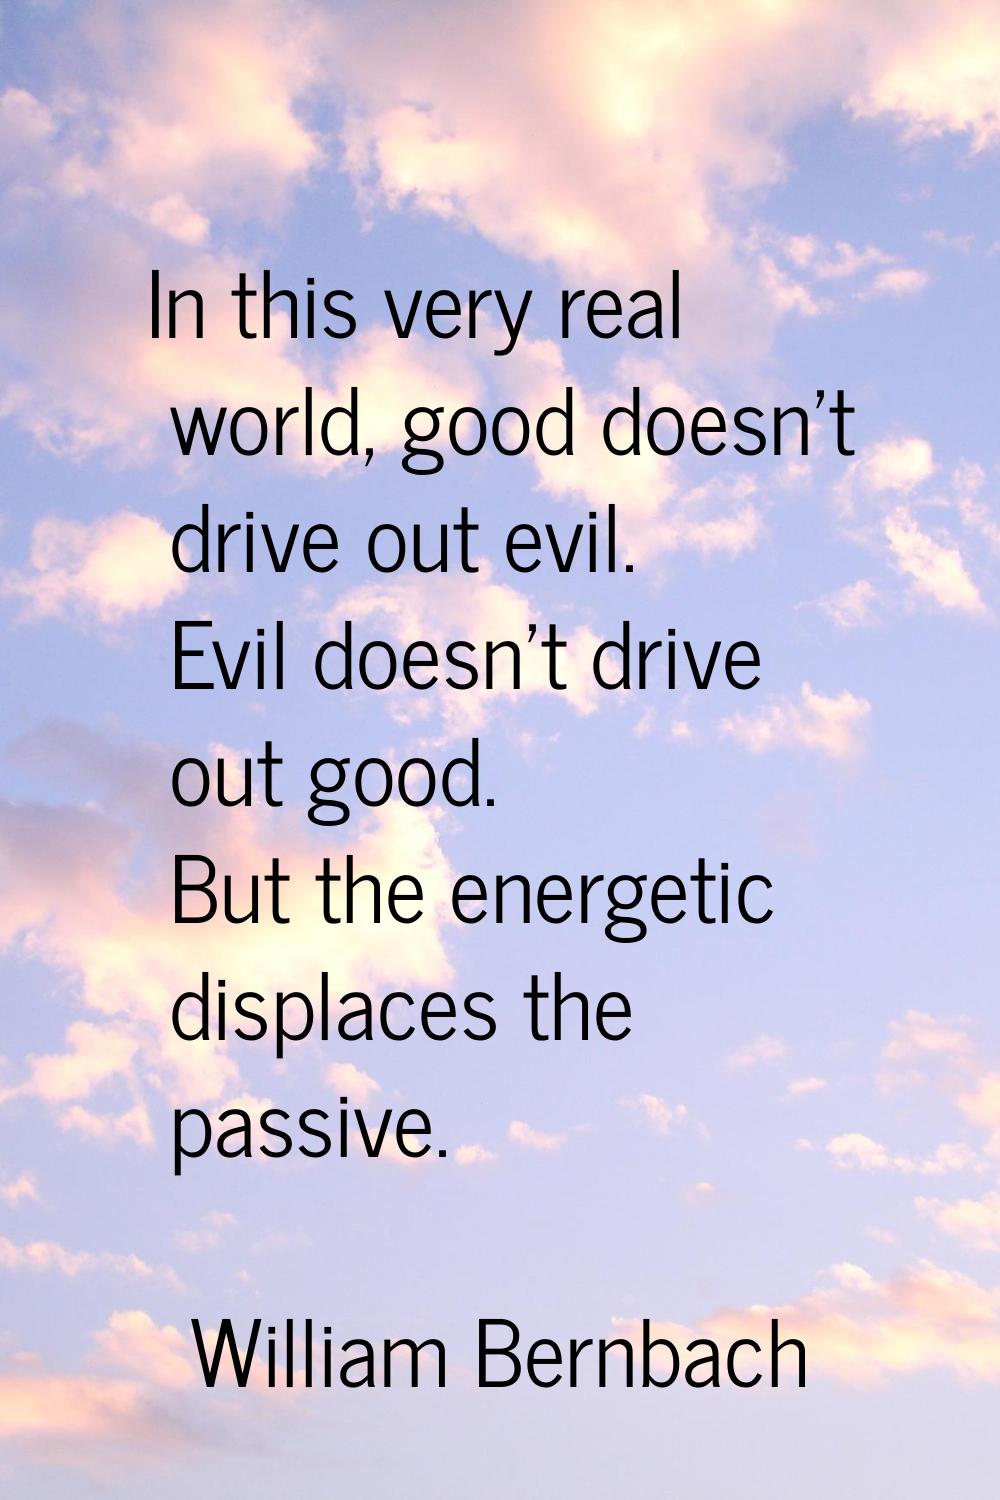 In this very real world, good doesn't drive out evil. Evil doesn't drive out good. But the energeti